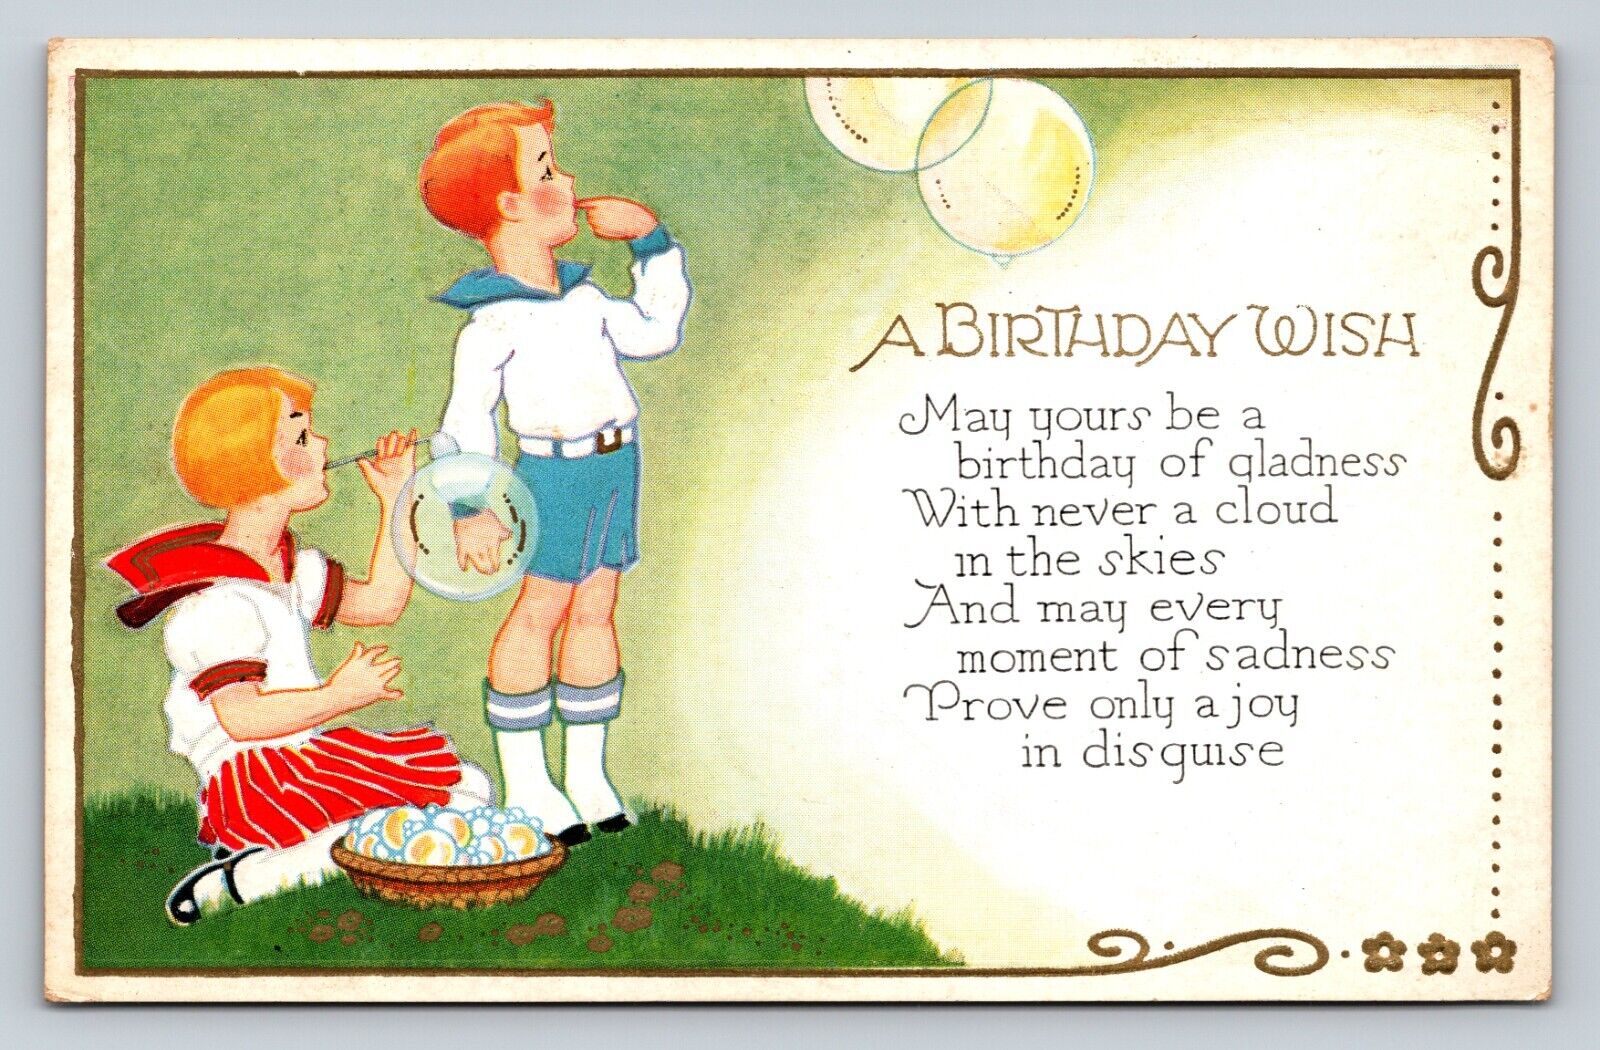 A Birthday Wish Children Filling Balloons Embossed VINTAGE Postcard